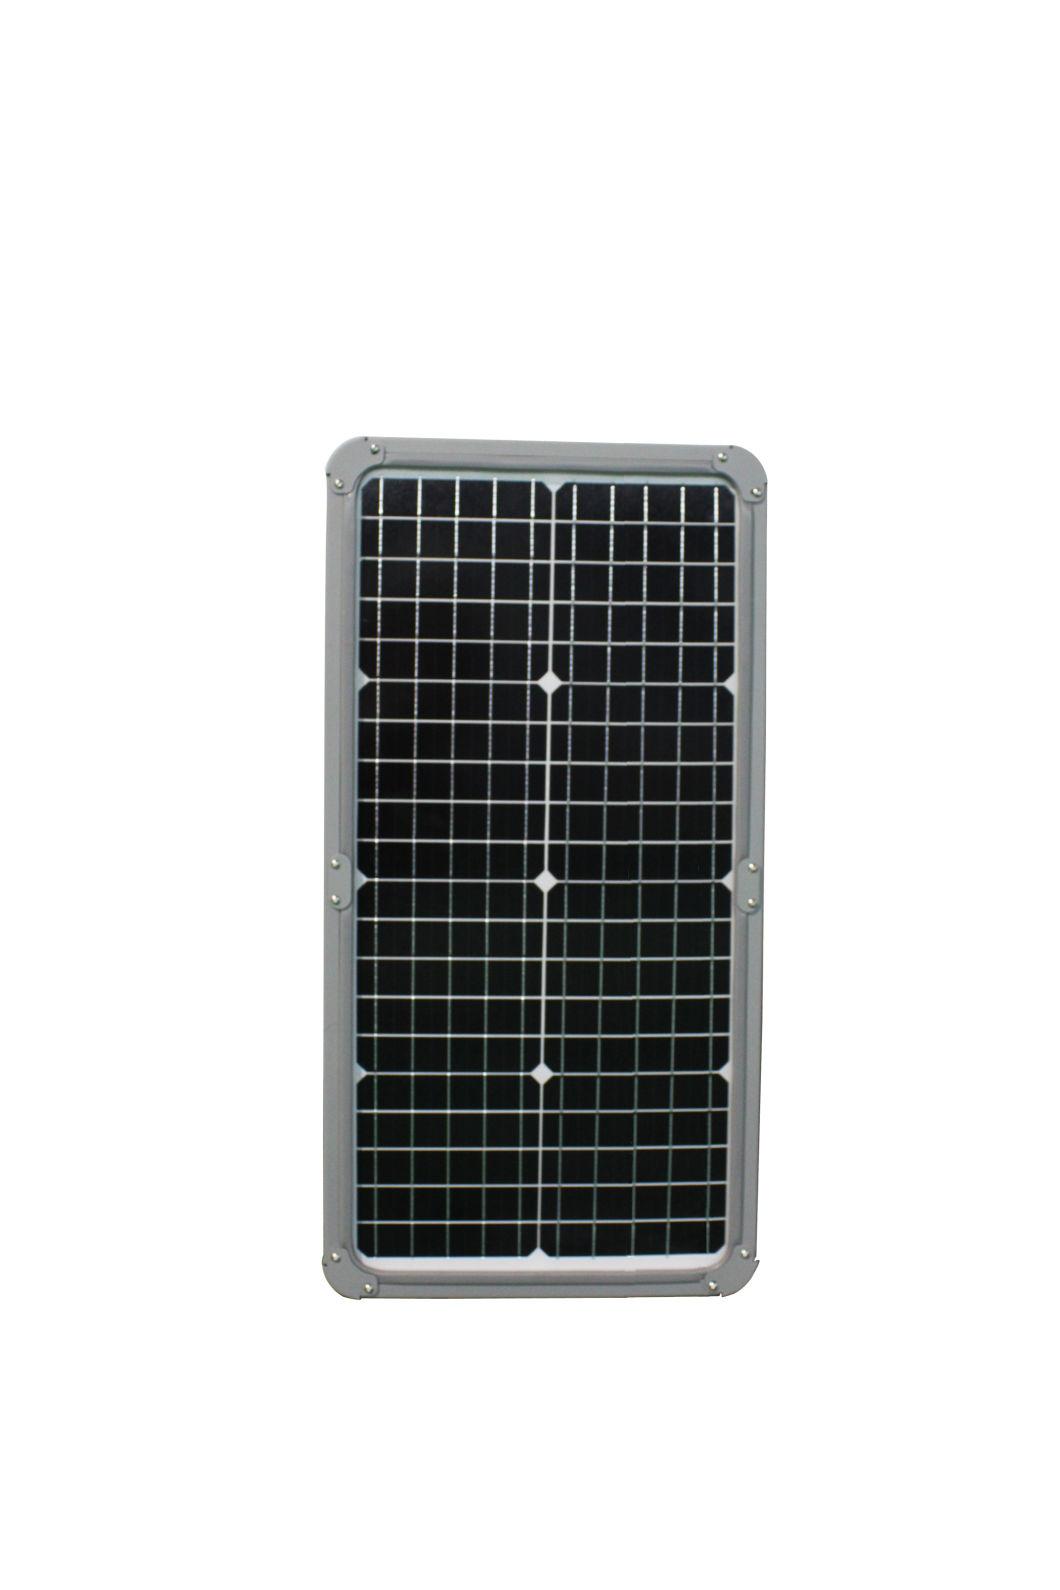 Advanced Technology IP66 120W Lumens All in One Integrated Solar Panel LED Street Light Outdoor